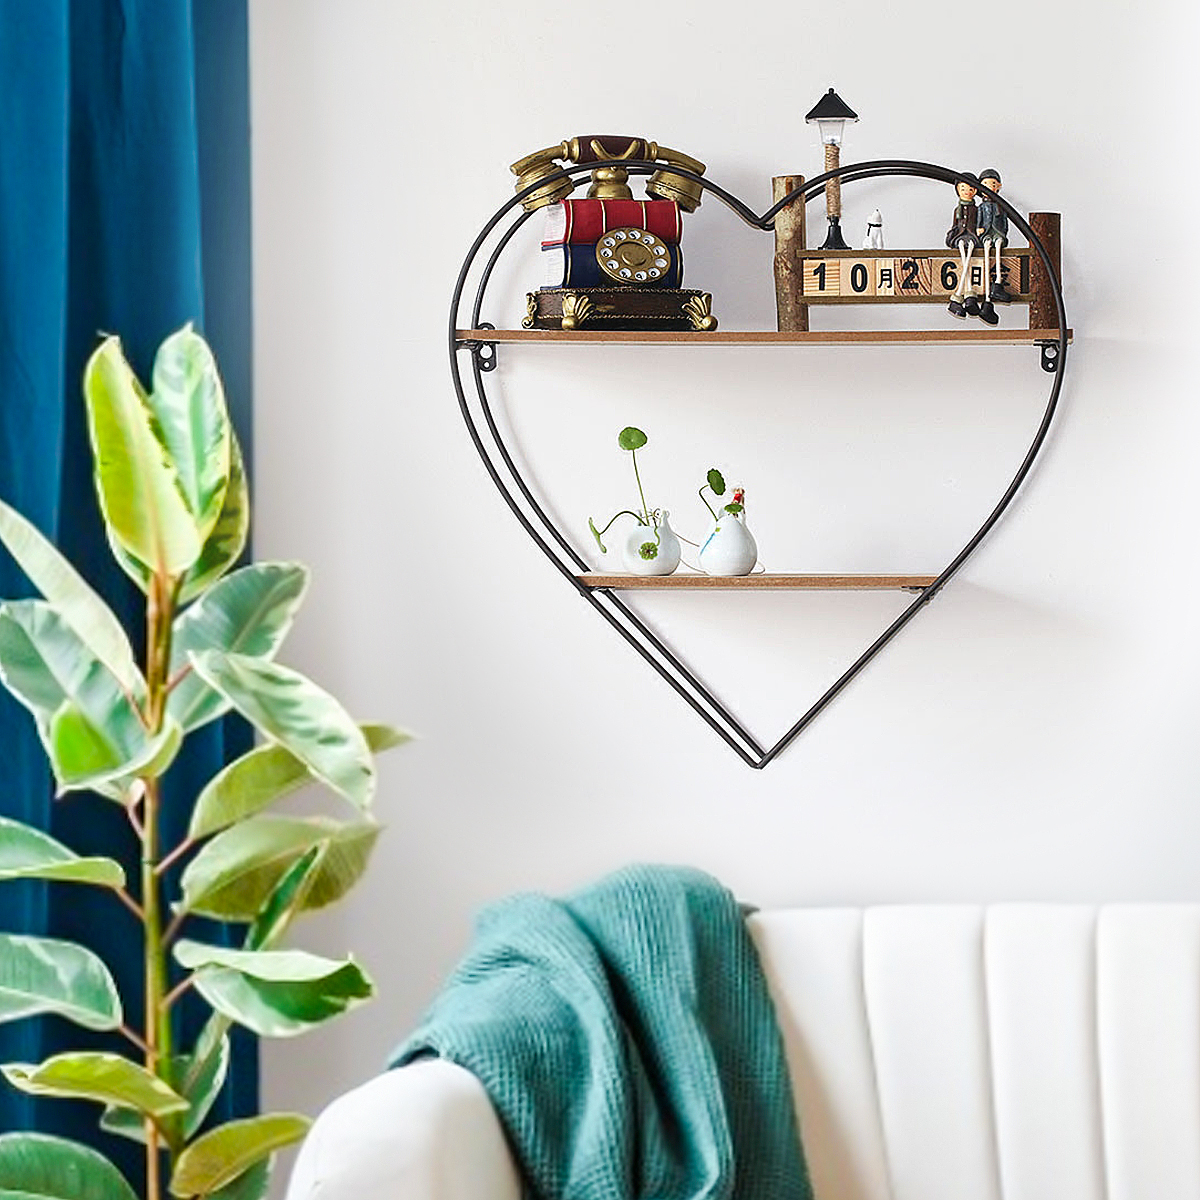 Heart-shaped-Wooden-Wall-Shelf-2-Layers-Vintage-Storage-Wall-Mounted-Display-Floating-Rack-for-Kitch-1785937-5